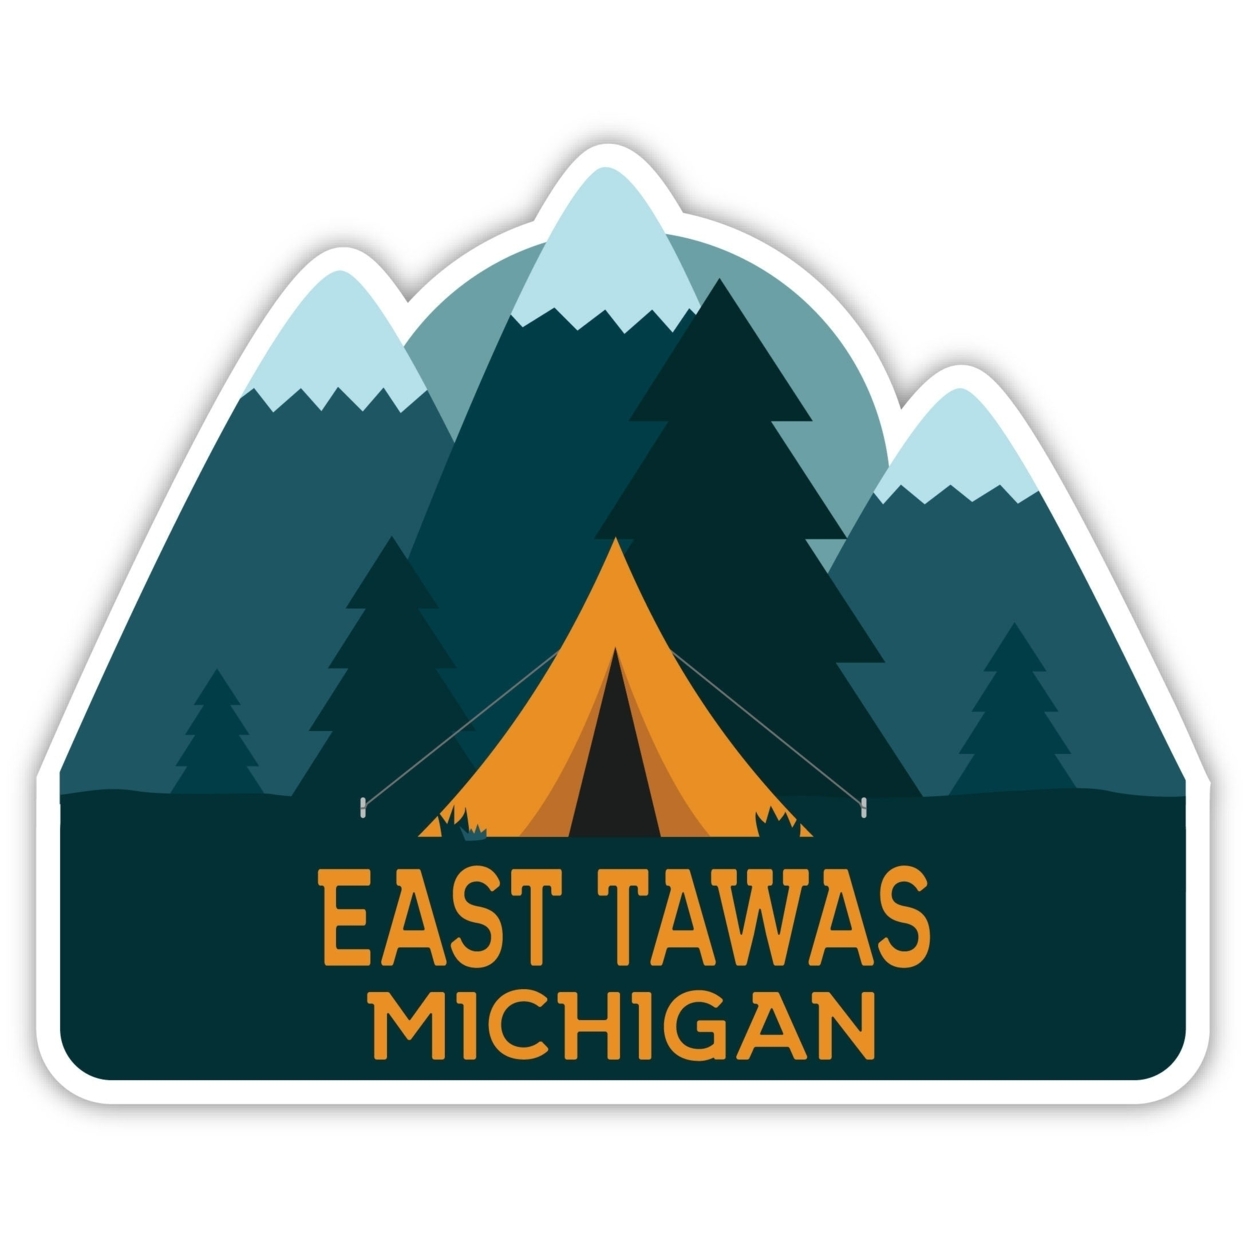 East Tawas Michigan Souvenir Decorative Stickers (Choose Theme And Size) - Single Unit, 12-Inch, Adventures Awaits